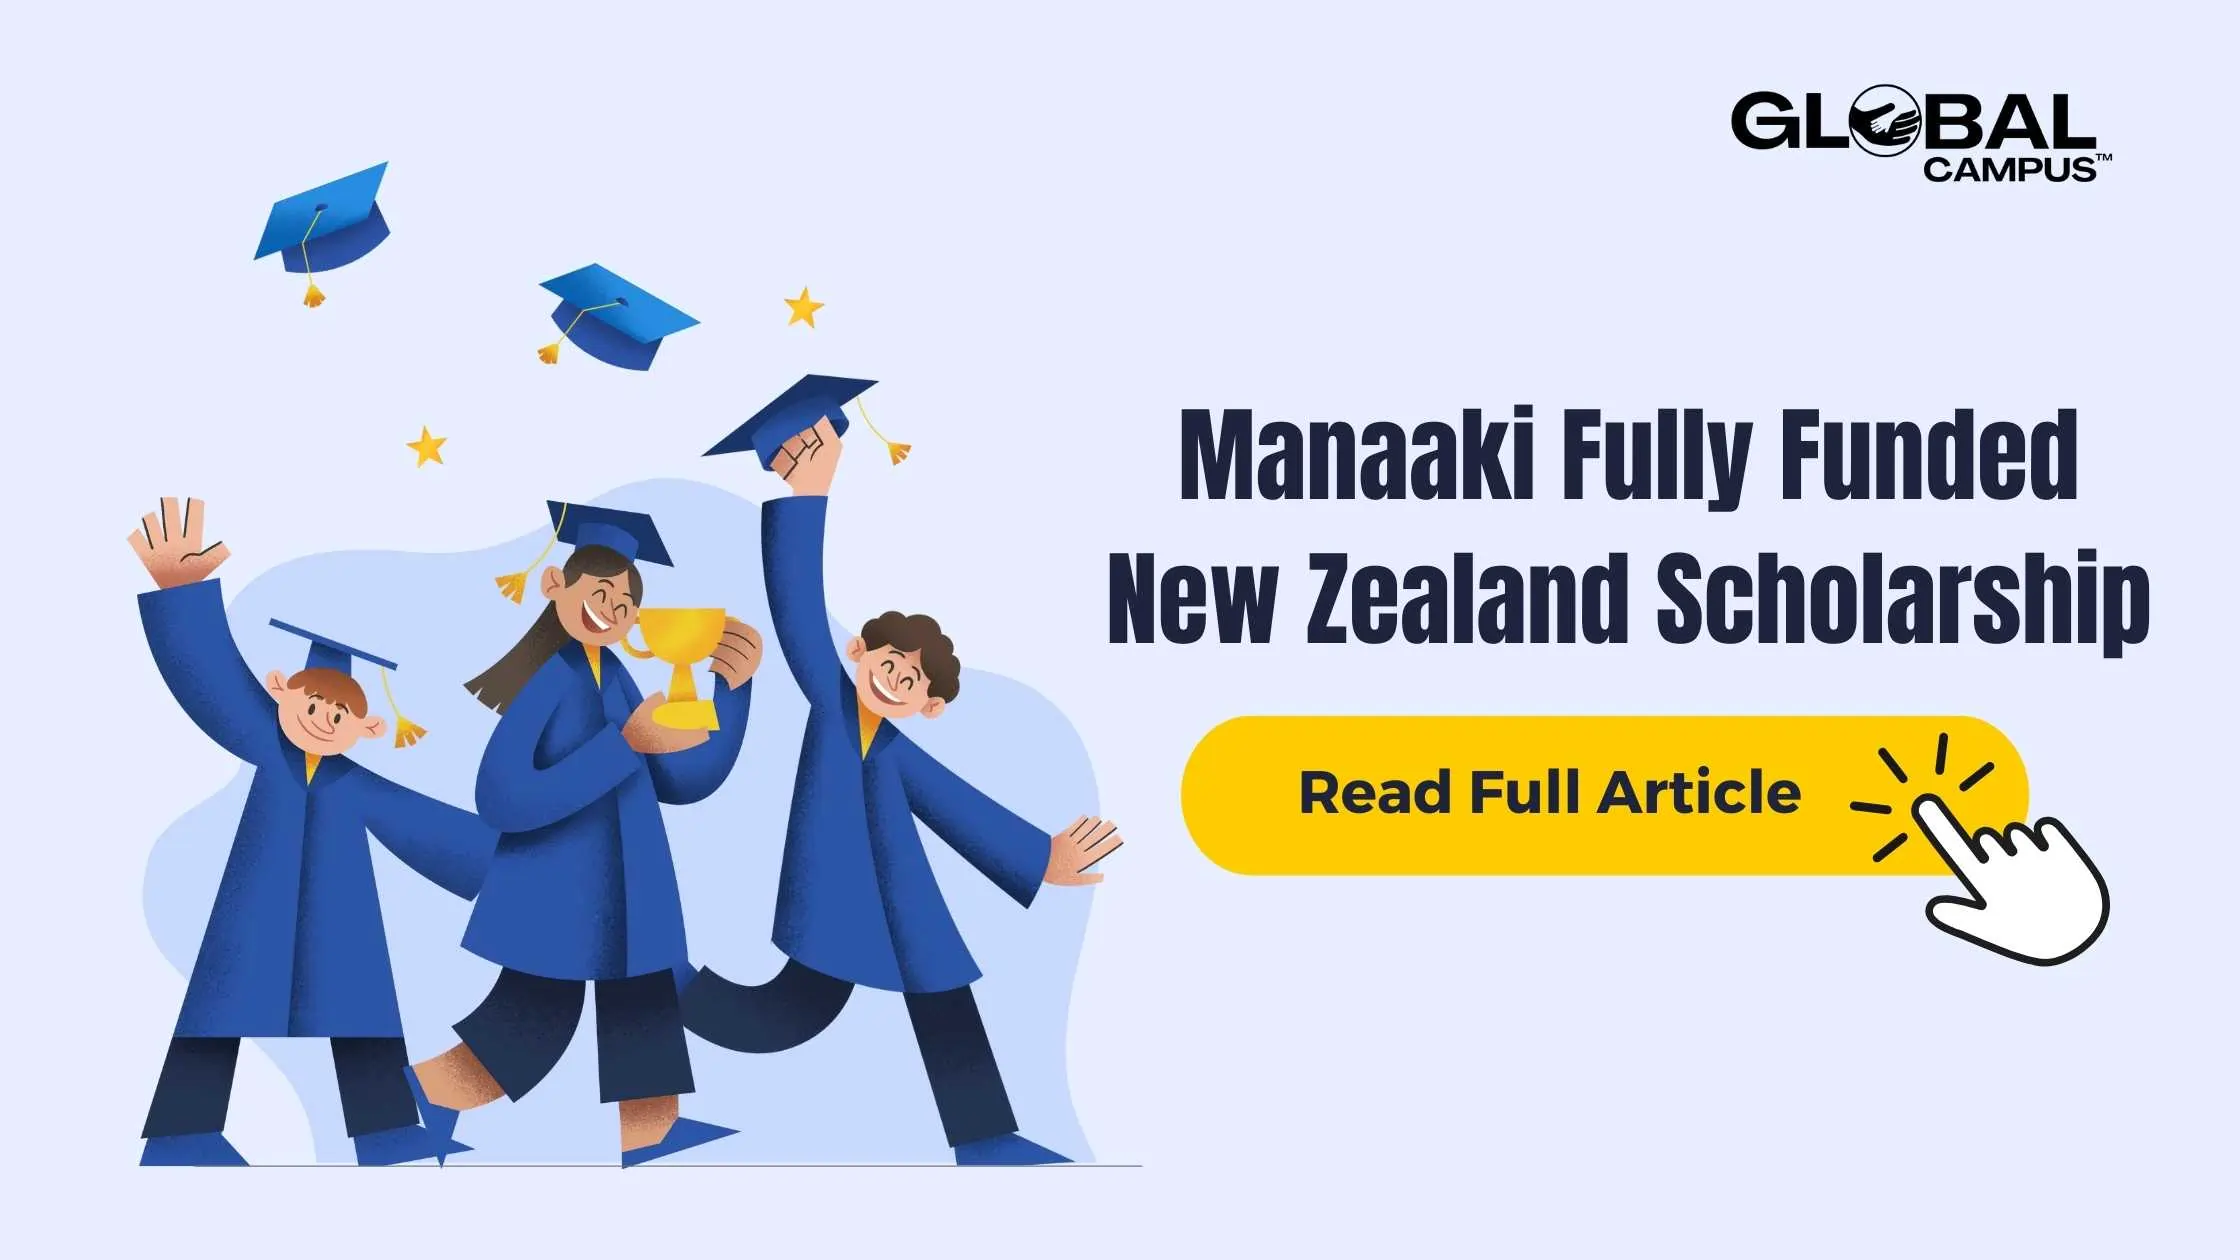 A group of students delighted to receive Manaaki full funded New Zealand Scholarship